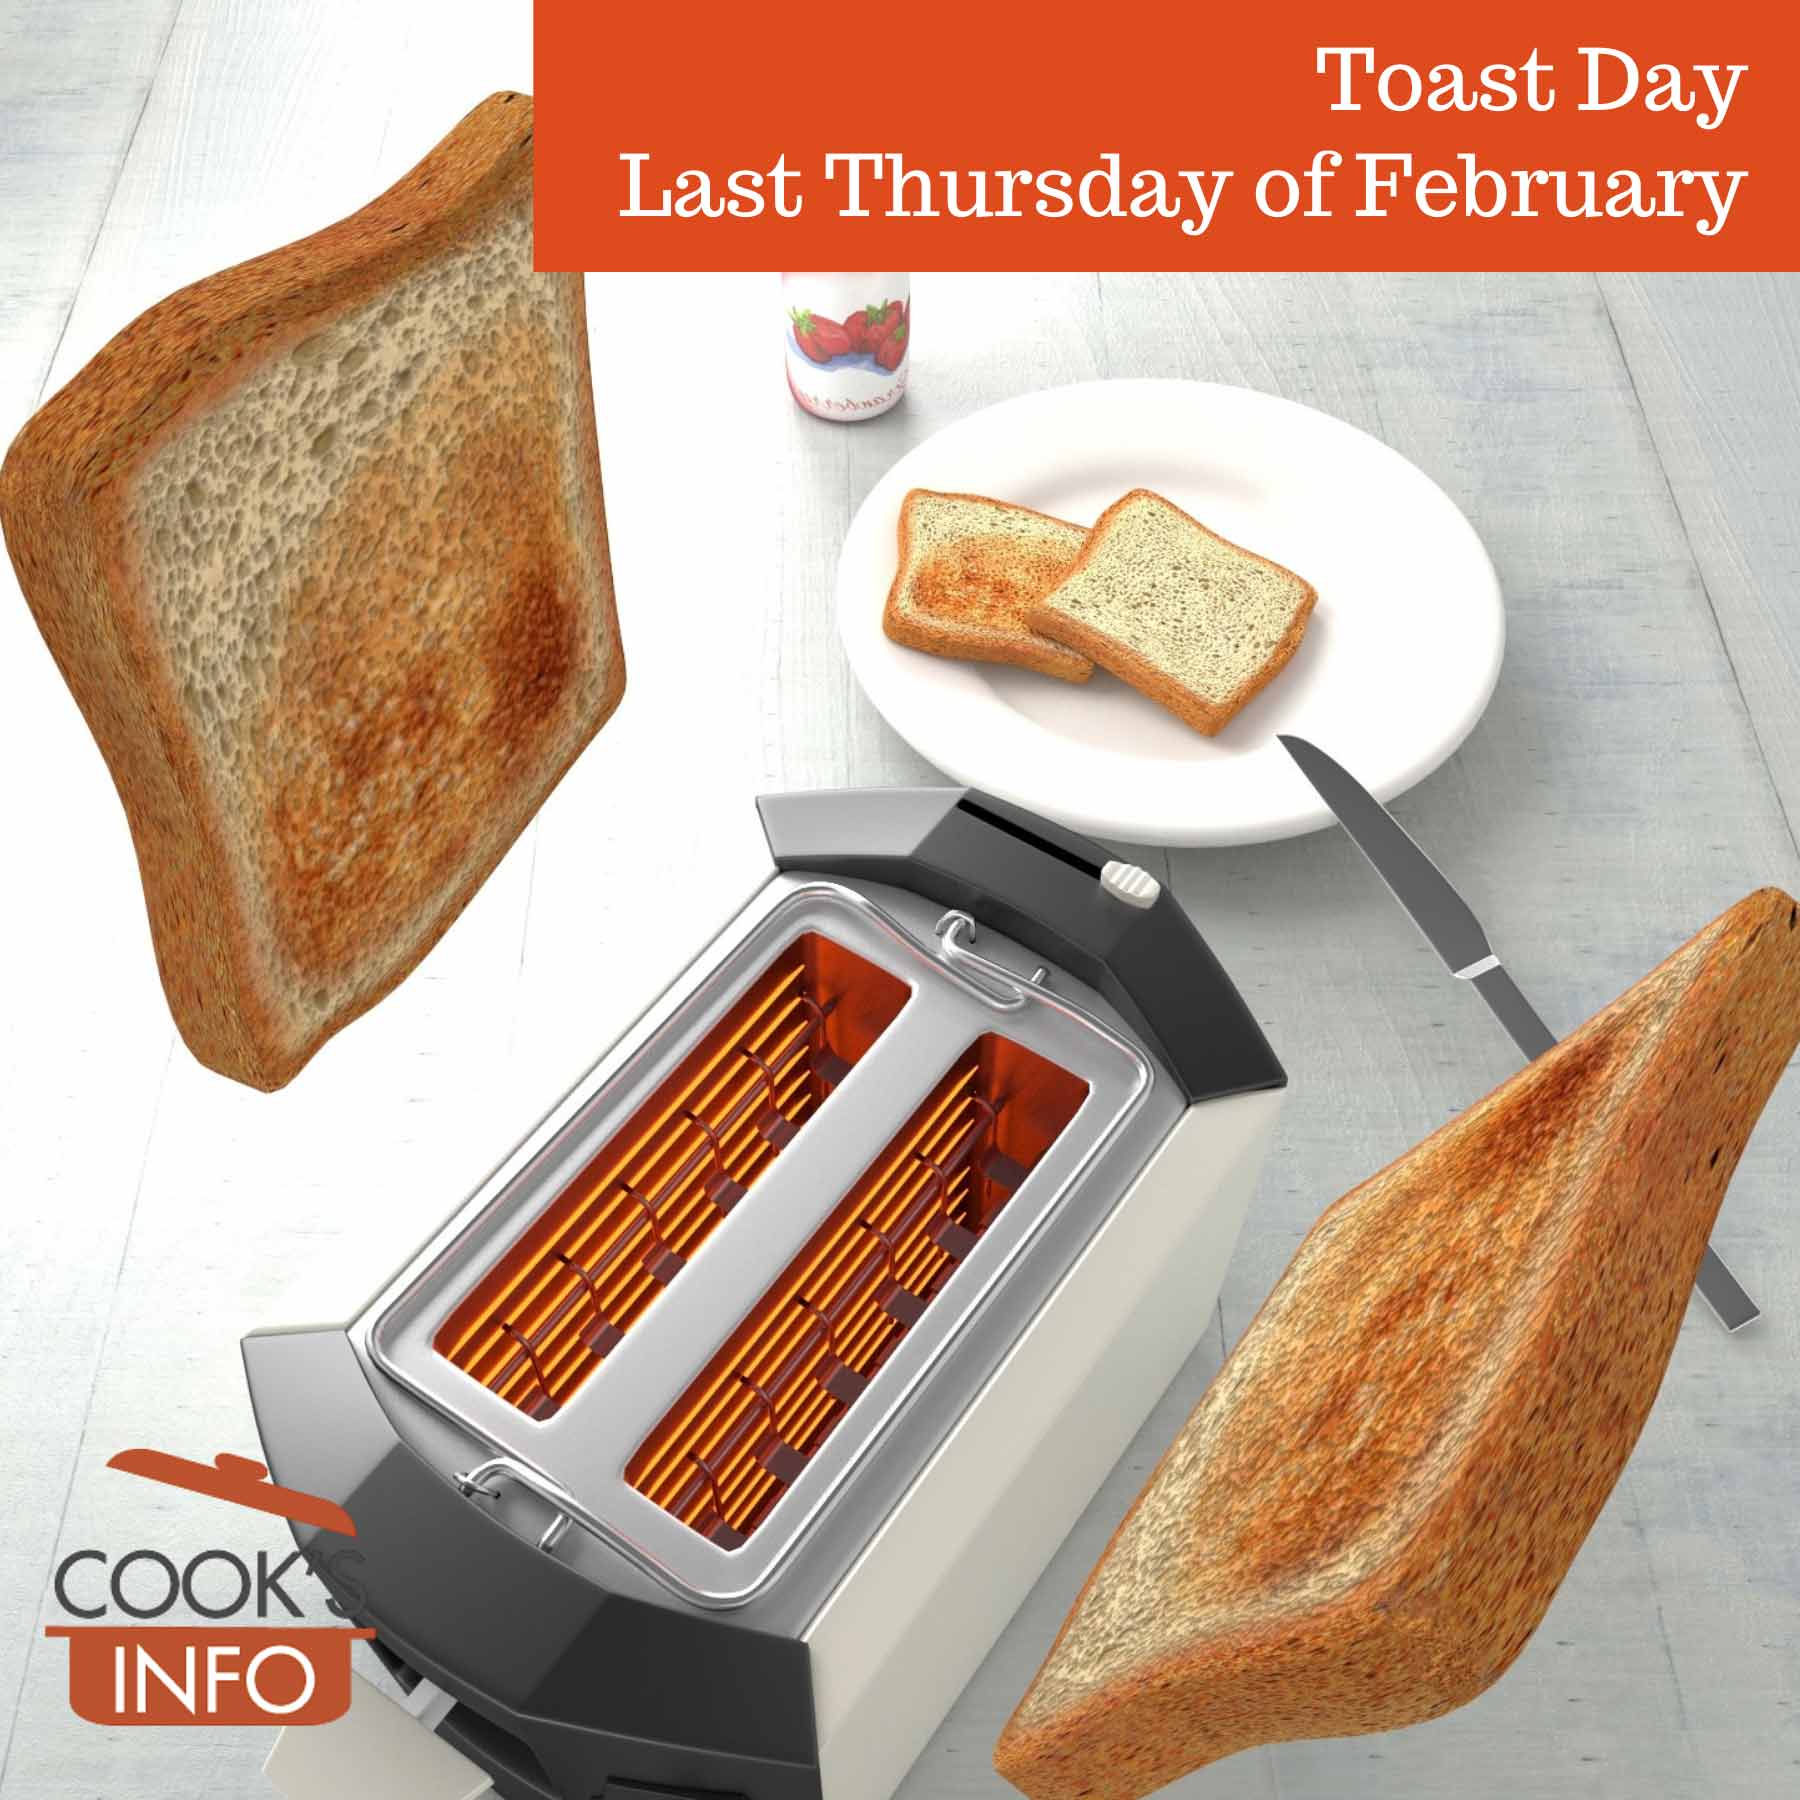 Toast popping out of toaster